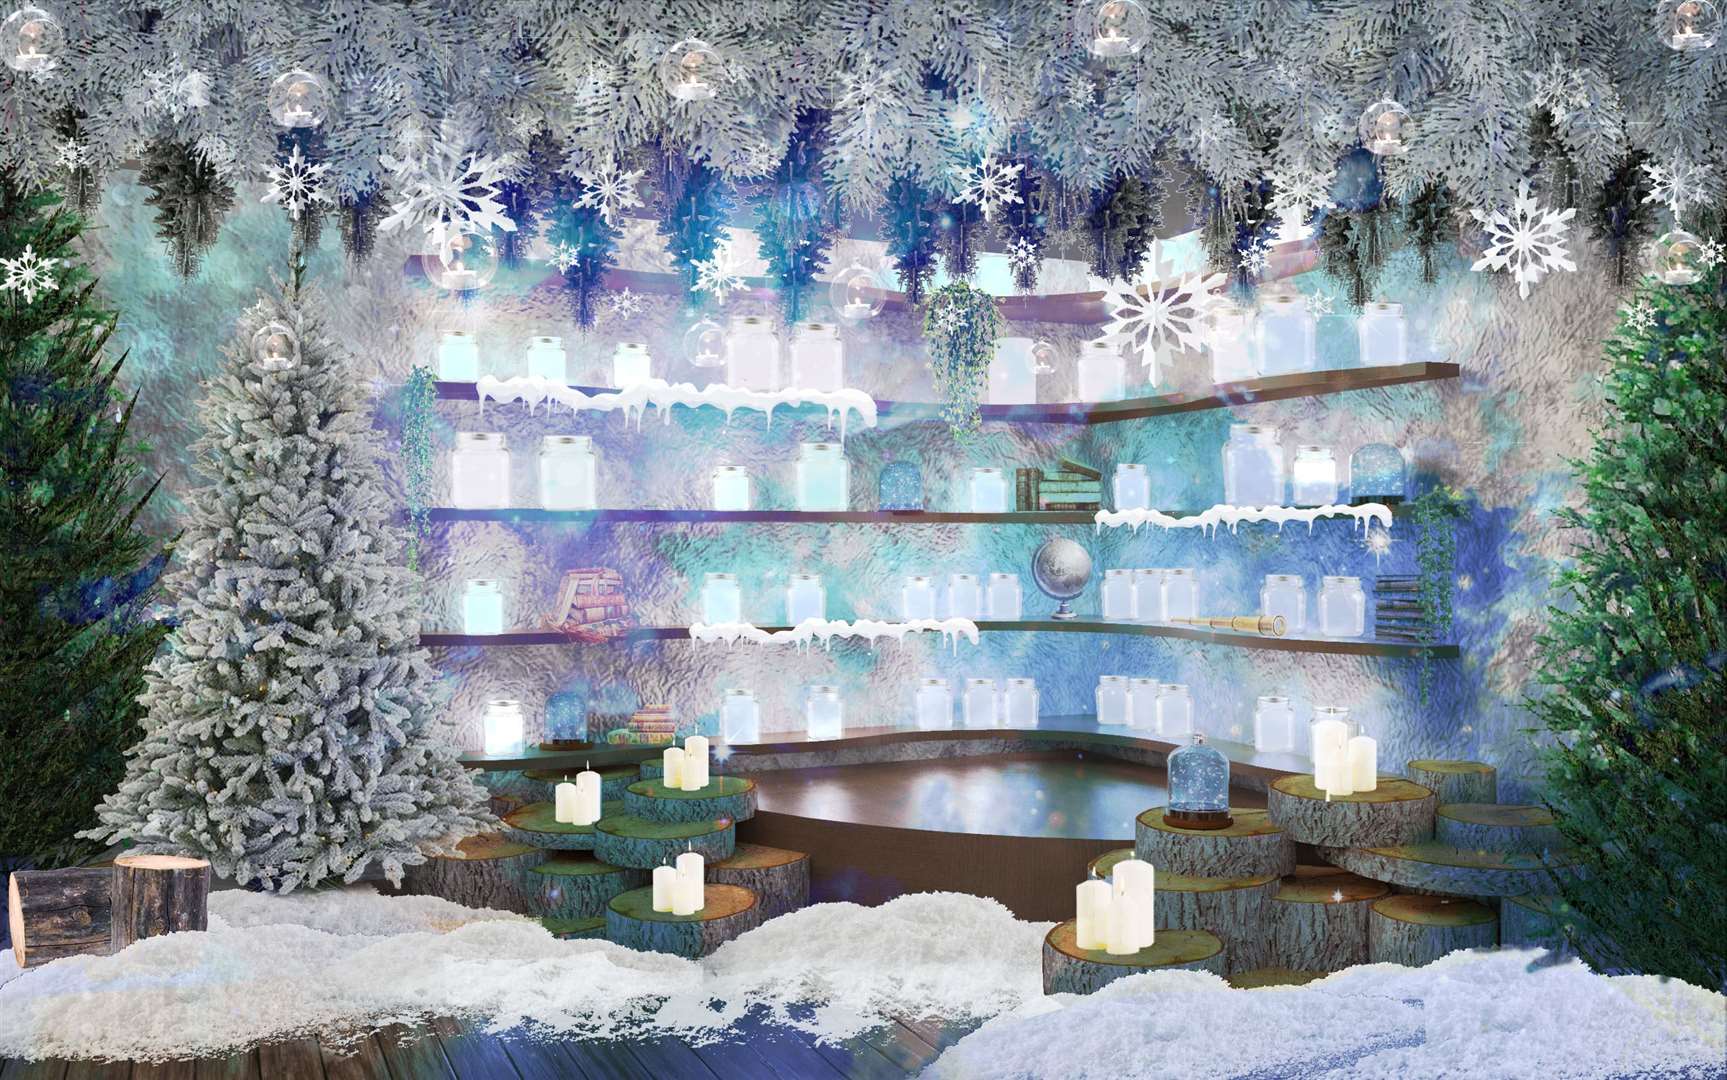 Bluewater will have a festive experience